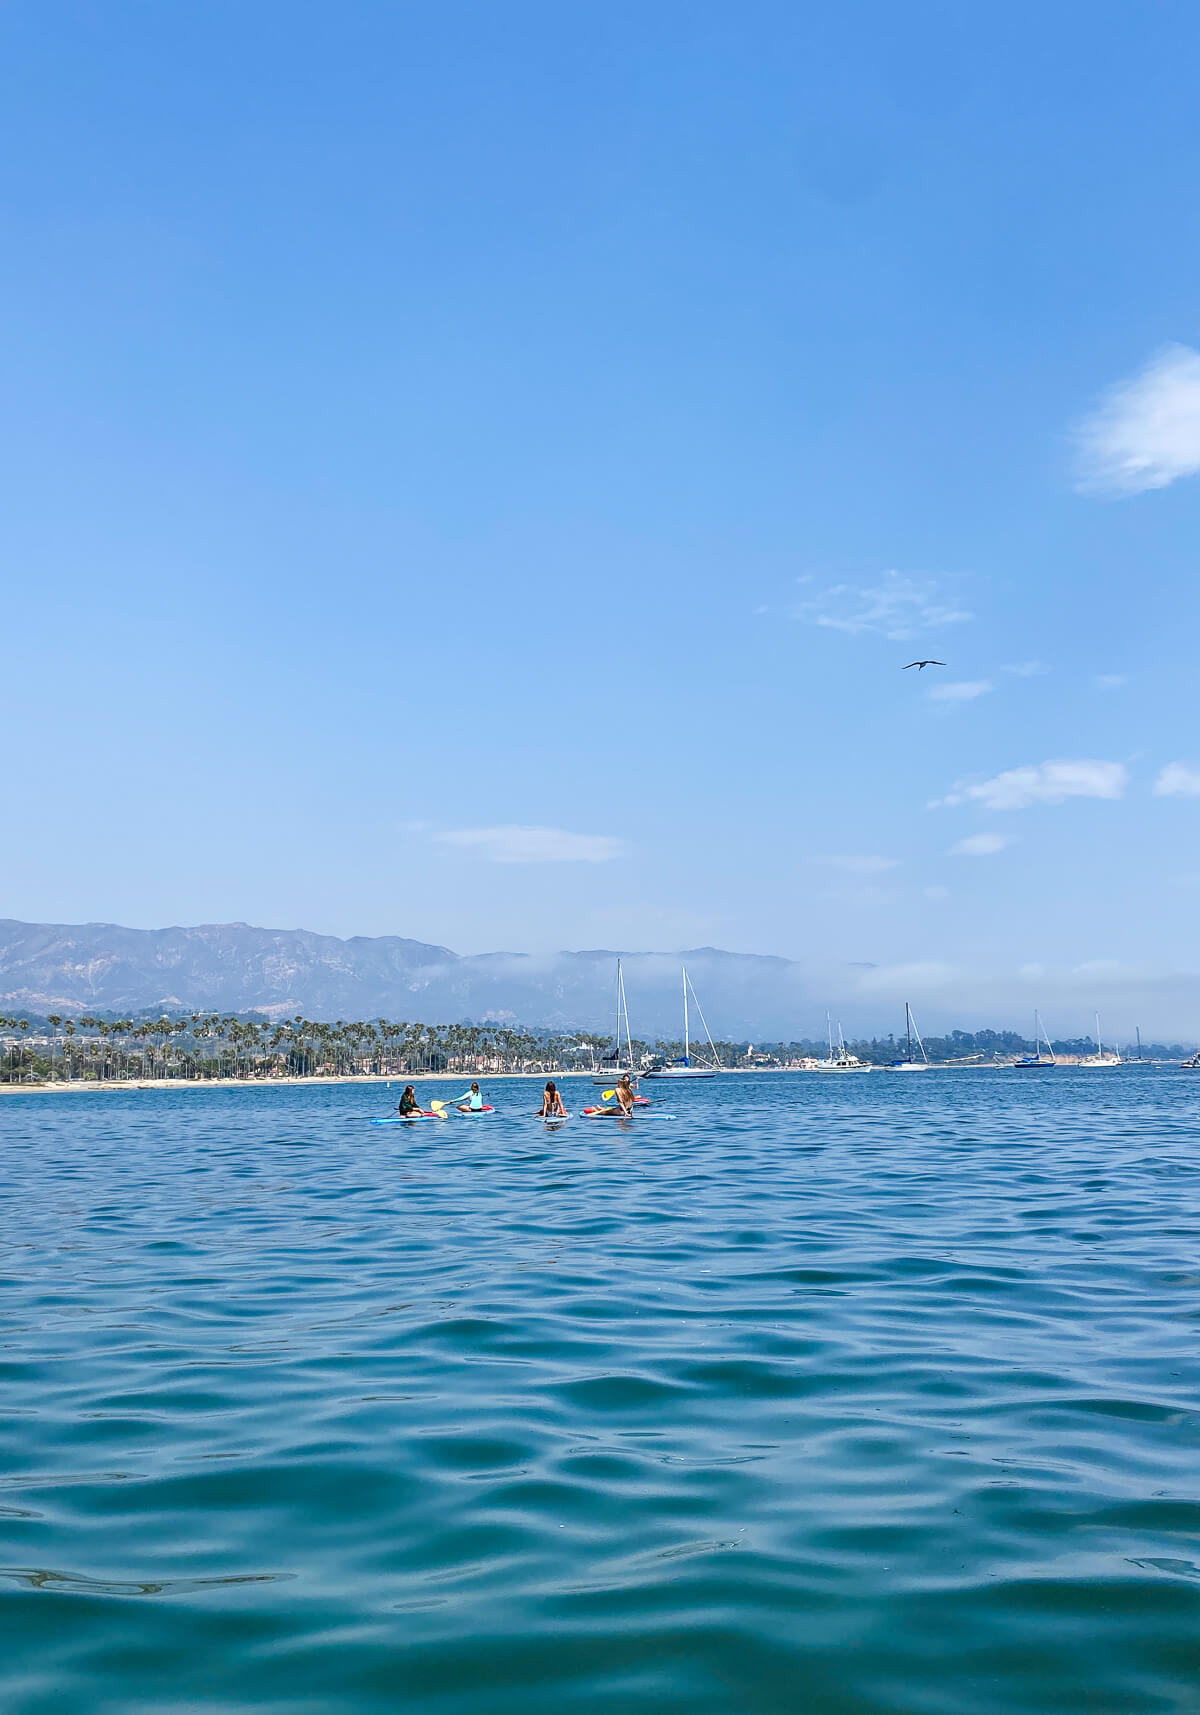 5 teenagers sit on paddleboards in the Santa Barbara ocean with the mountains and shoreline in the background. 